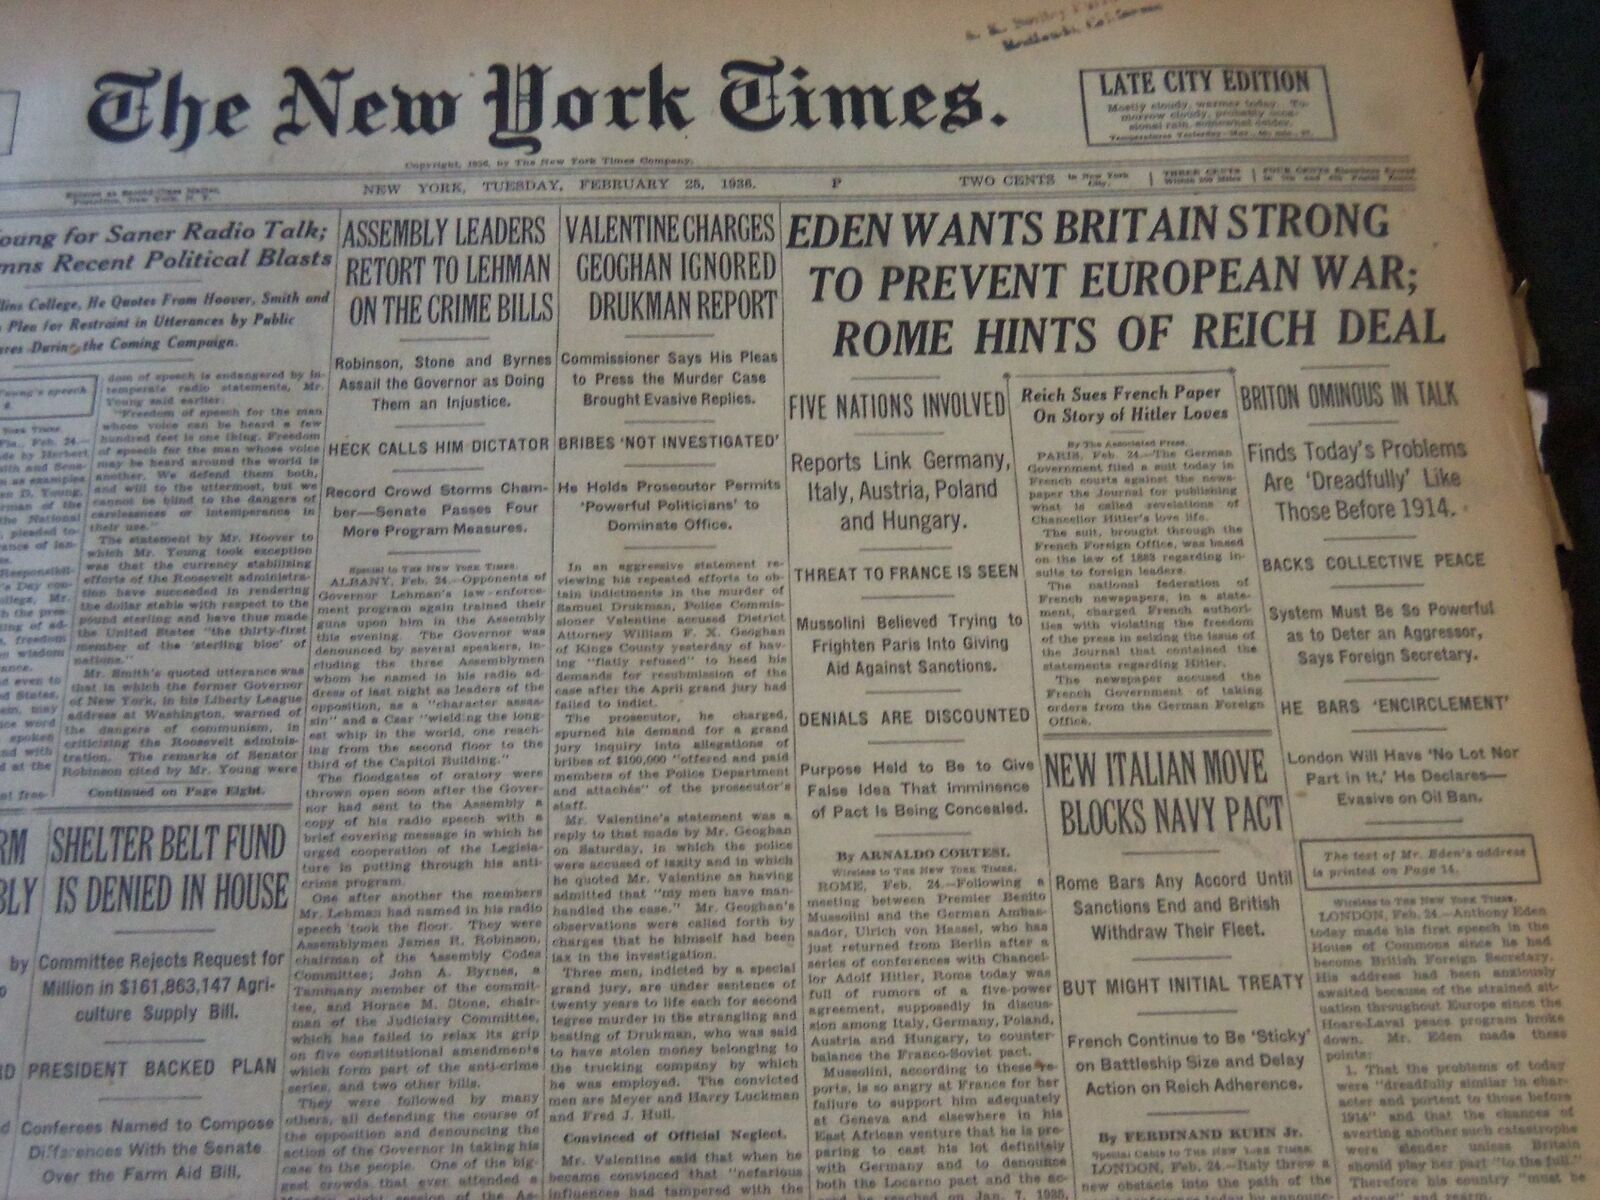 1936 FEB 25 NEW YORK TIMES - EDEN'S WANTS BRITAIN STRONG TO PREVENT WAR- NT 6701